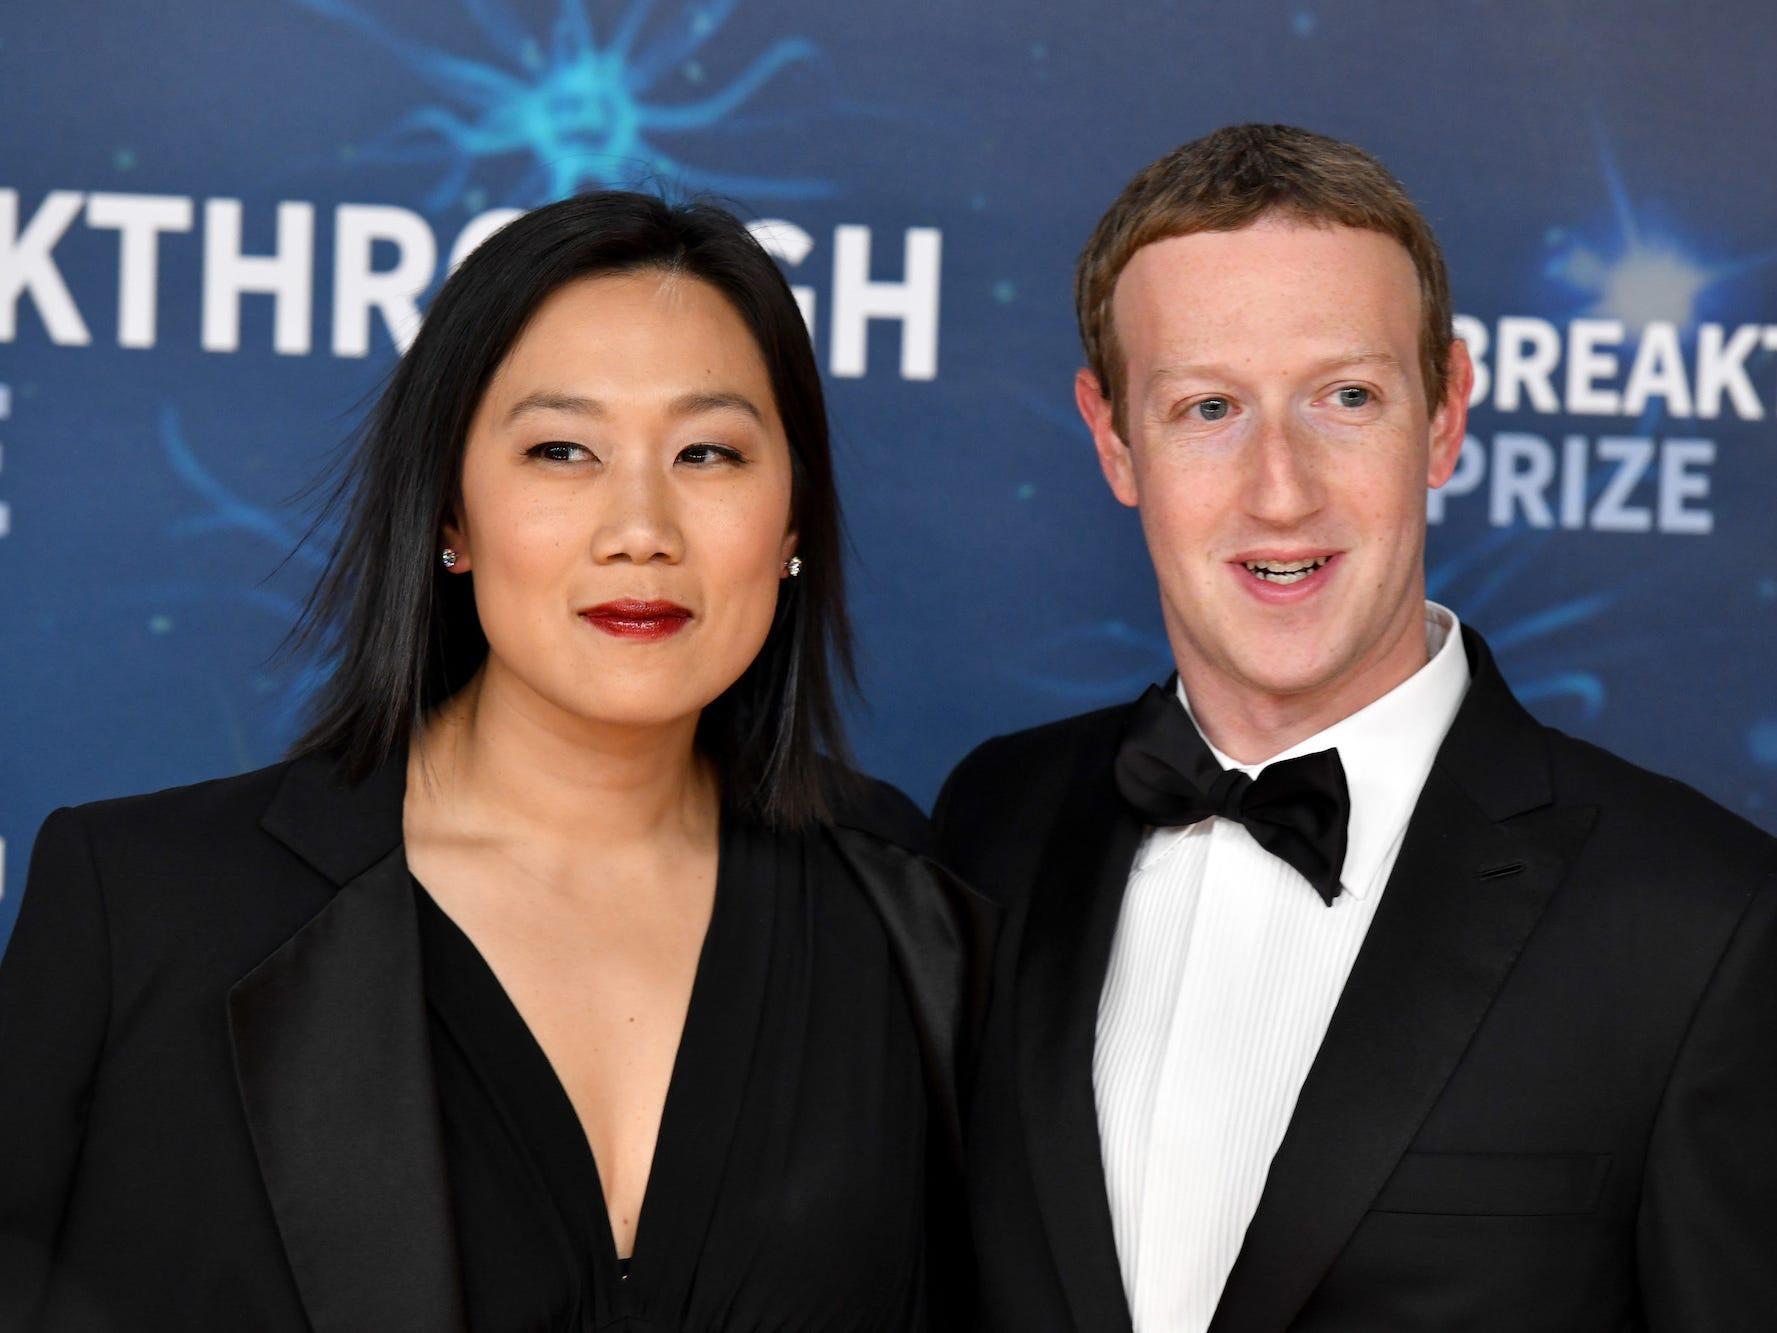 Black staff at the Chan Zuckerberg Initiative are 'underpaid